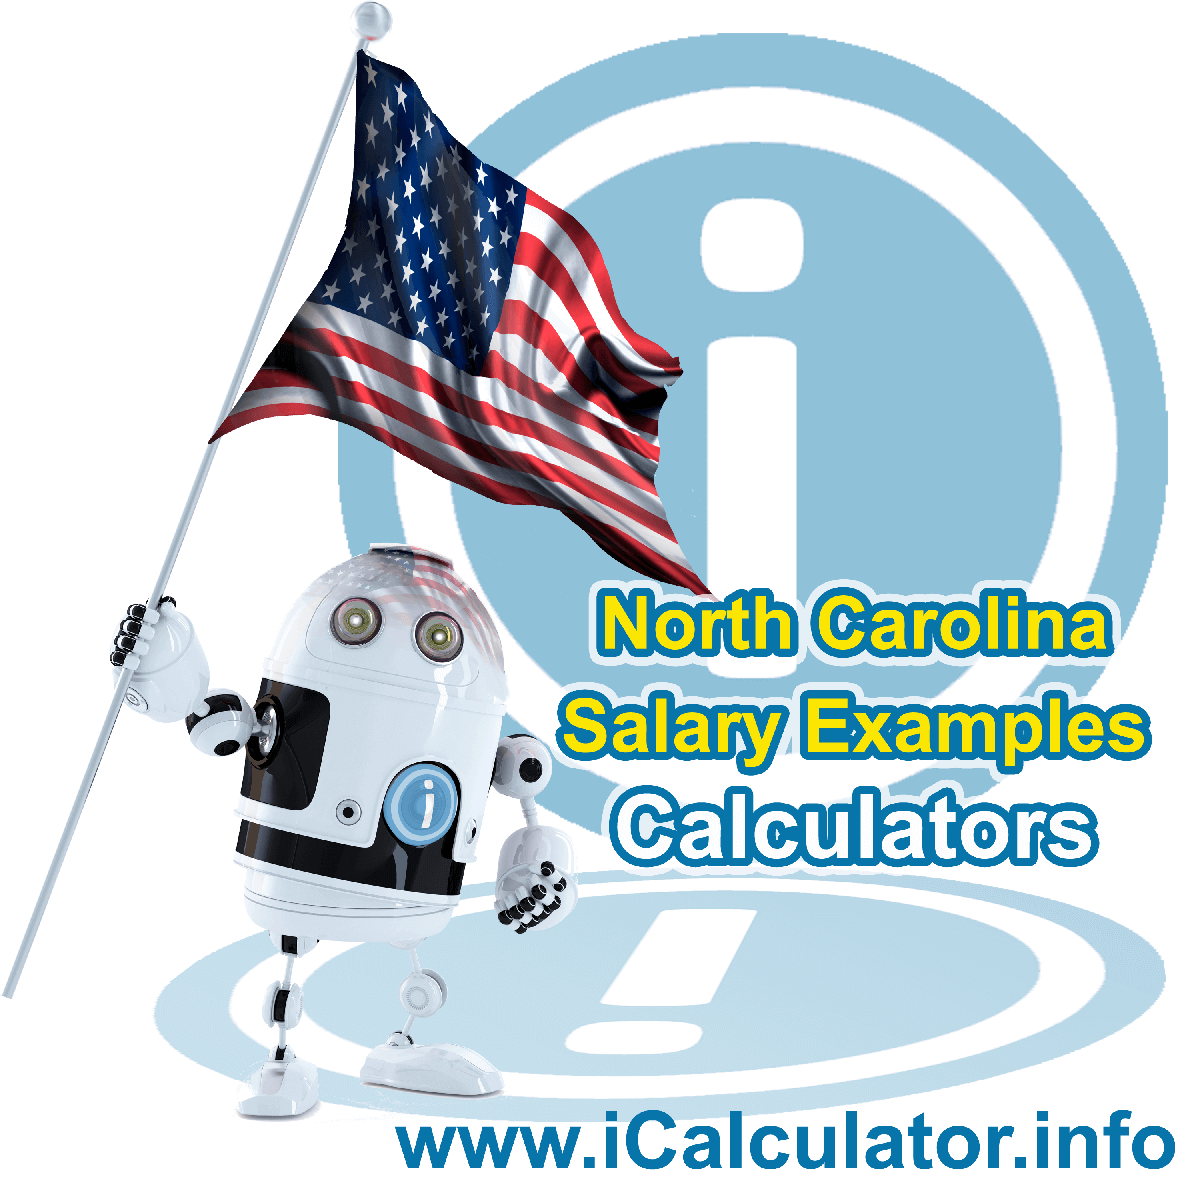 North Carolina Salary Example for $ 195,000.00 in 2023 | iCalculator™ | $ 195,000.00 salary example for employee and employer paying North Carolina State tincome taxes. Detailed salary after tax calculation including North Carolina State Tax, Federal State Tax, Medicare Deductions, Social Security, Capital Gains and other income tax and salary deductions complete with supporting North Carolina state tax tables 